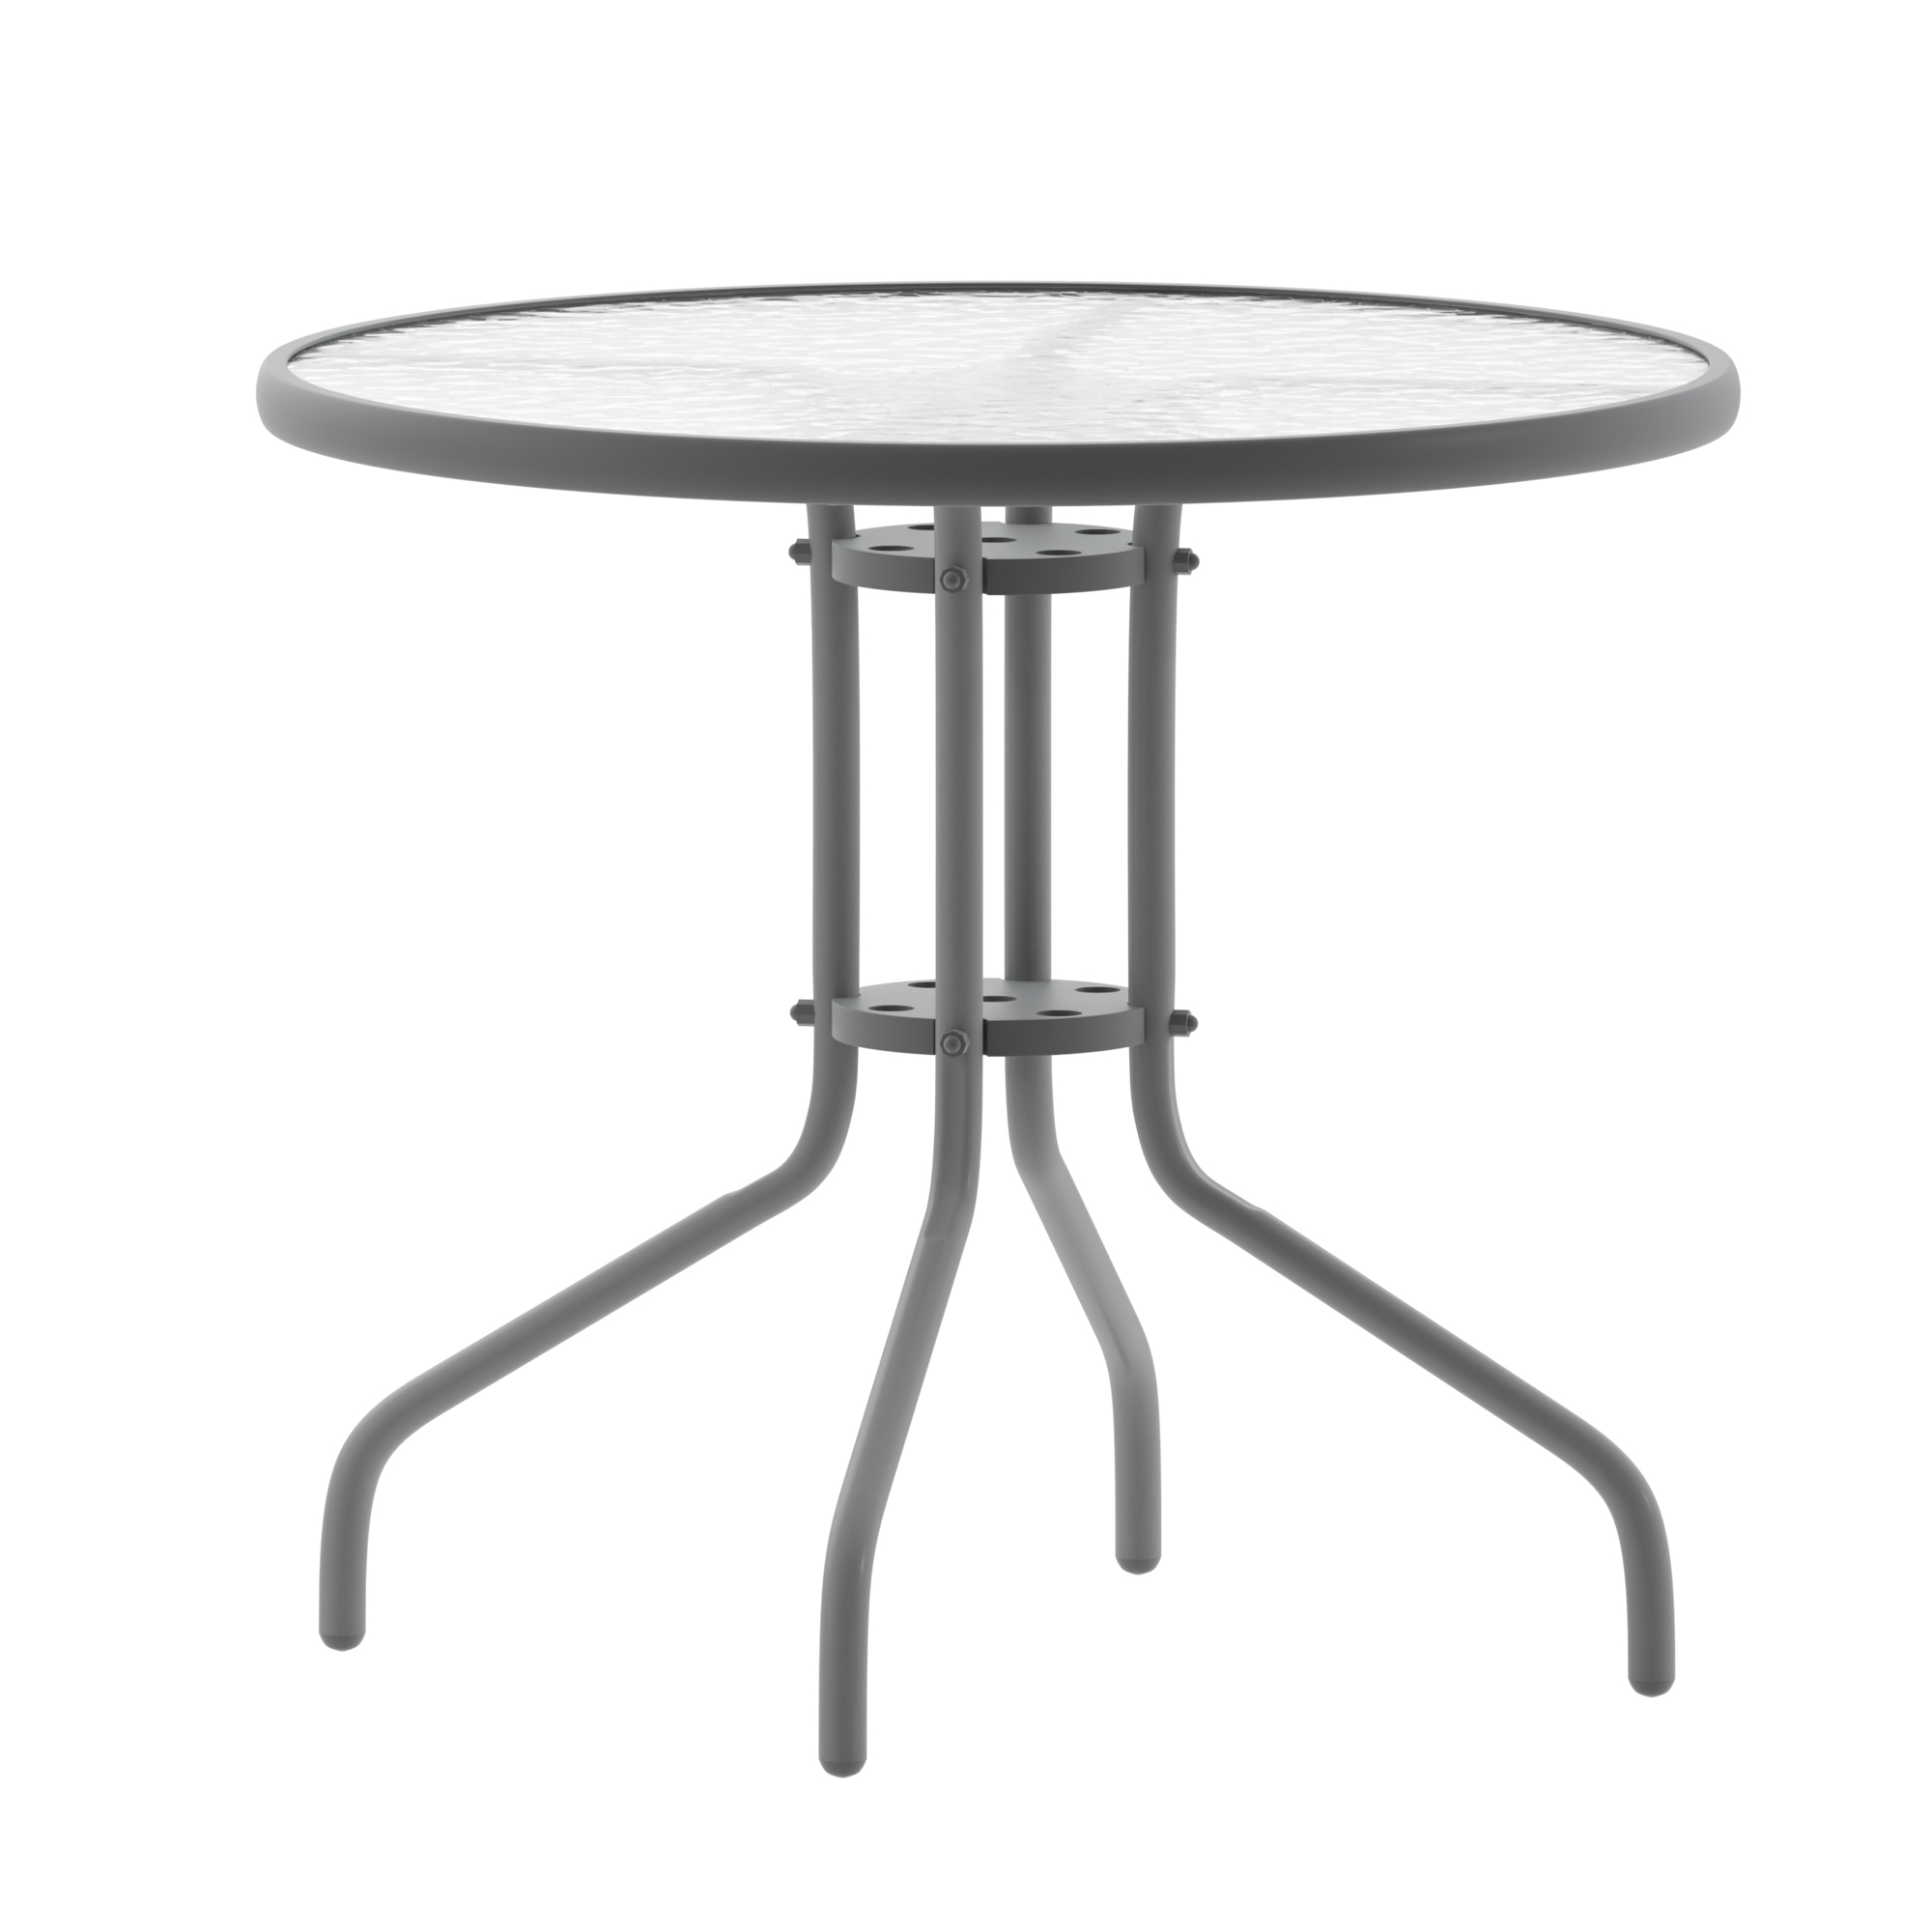 Flash Furniture, 31.5Inch Round Tempered Glass Metal Table, Table Shape Round, Primary Color Gray, Height 28 in, Model TLH0702SV